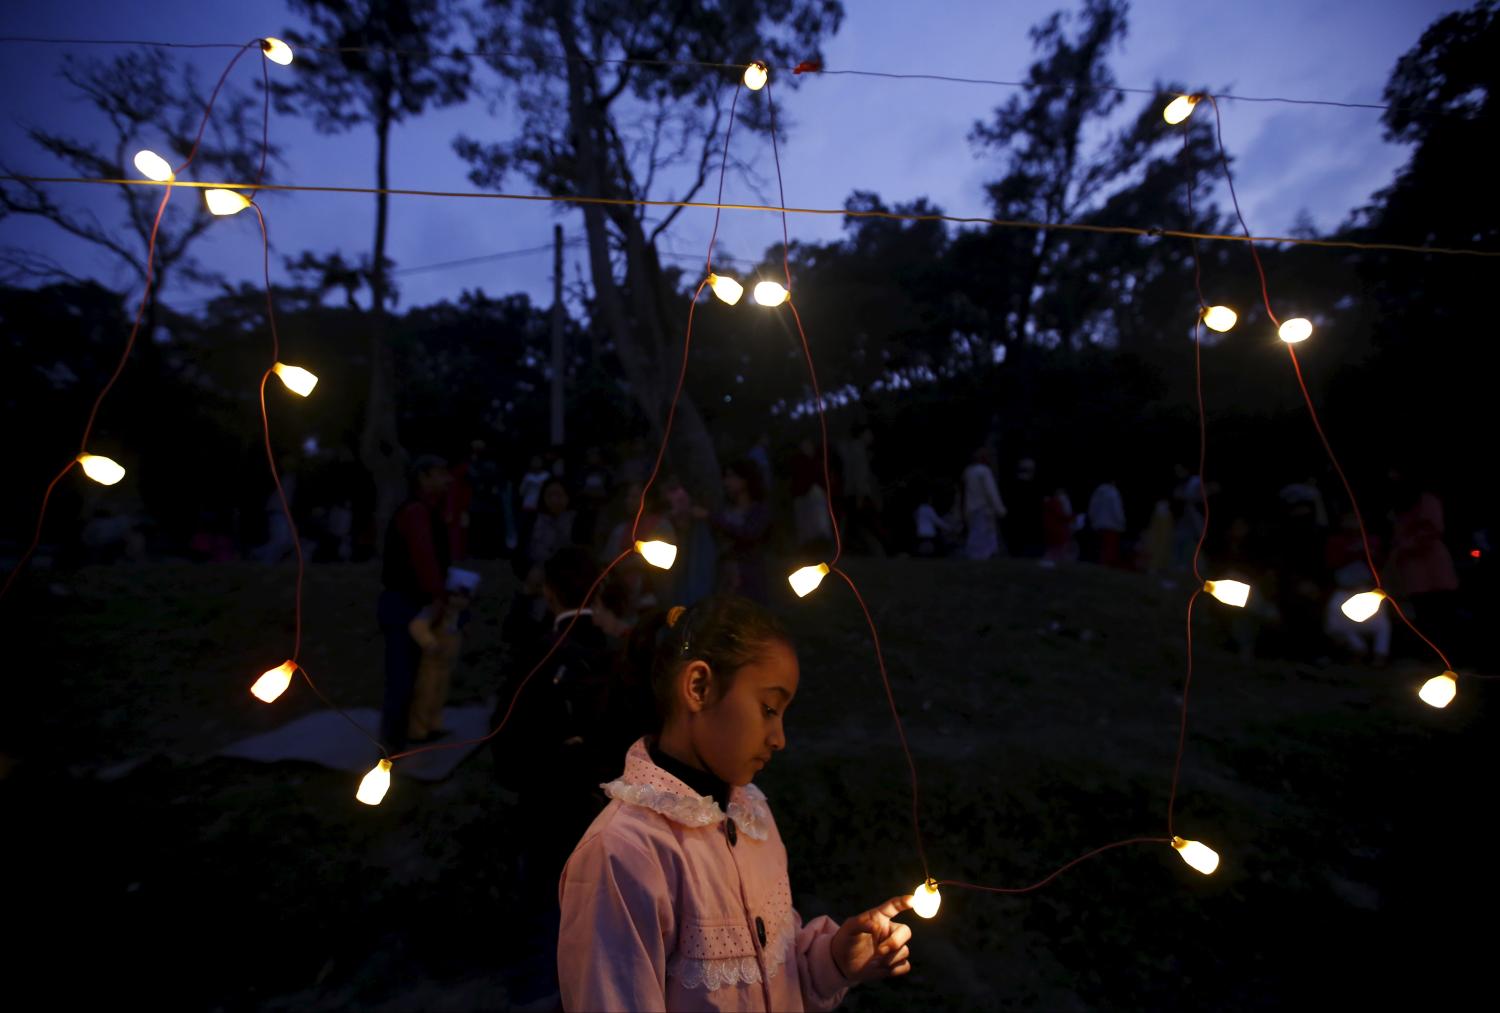 A girl plays with a light bulb along the bank of Bagmati River during the "Chhat" festival in Kathmandu